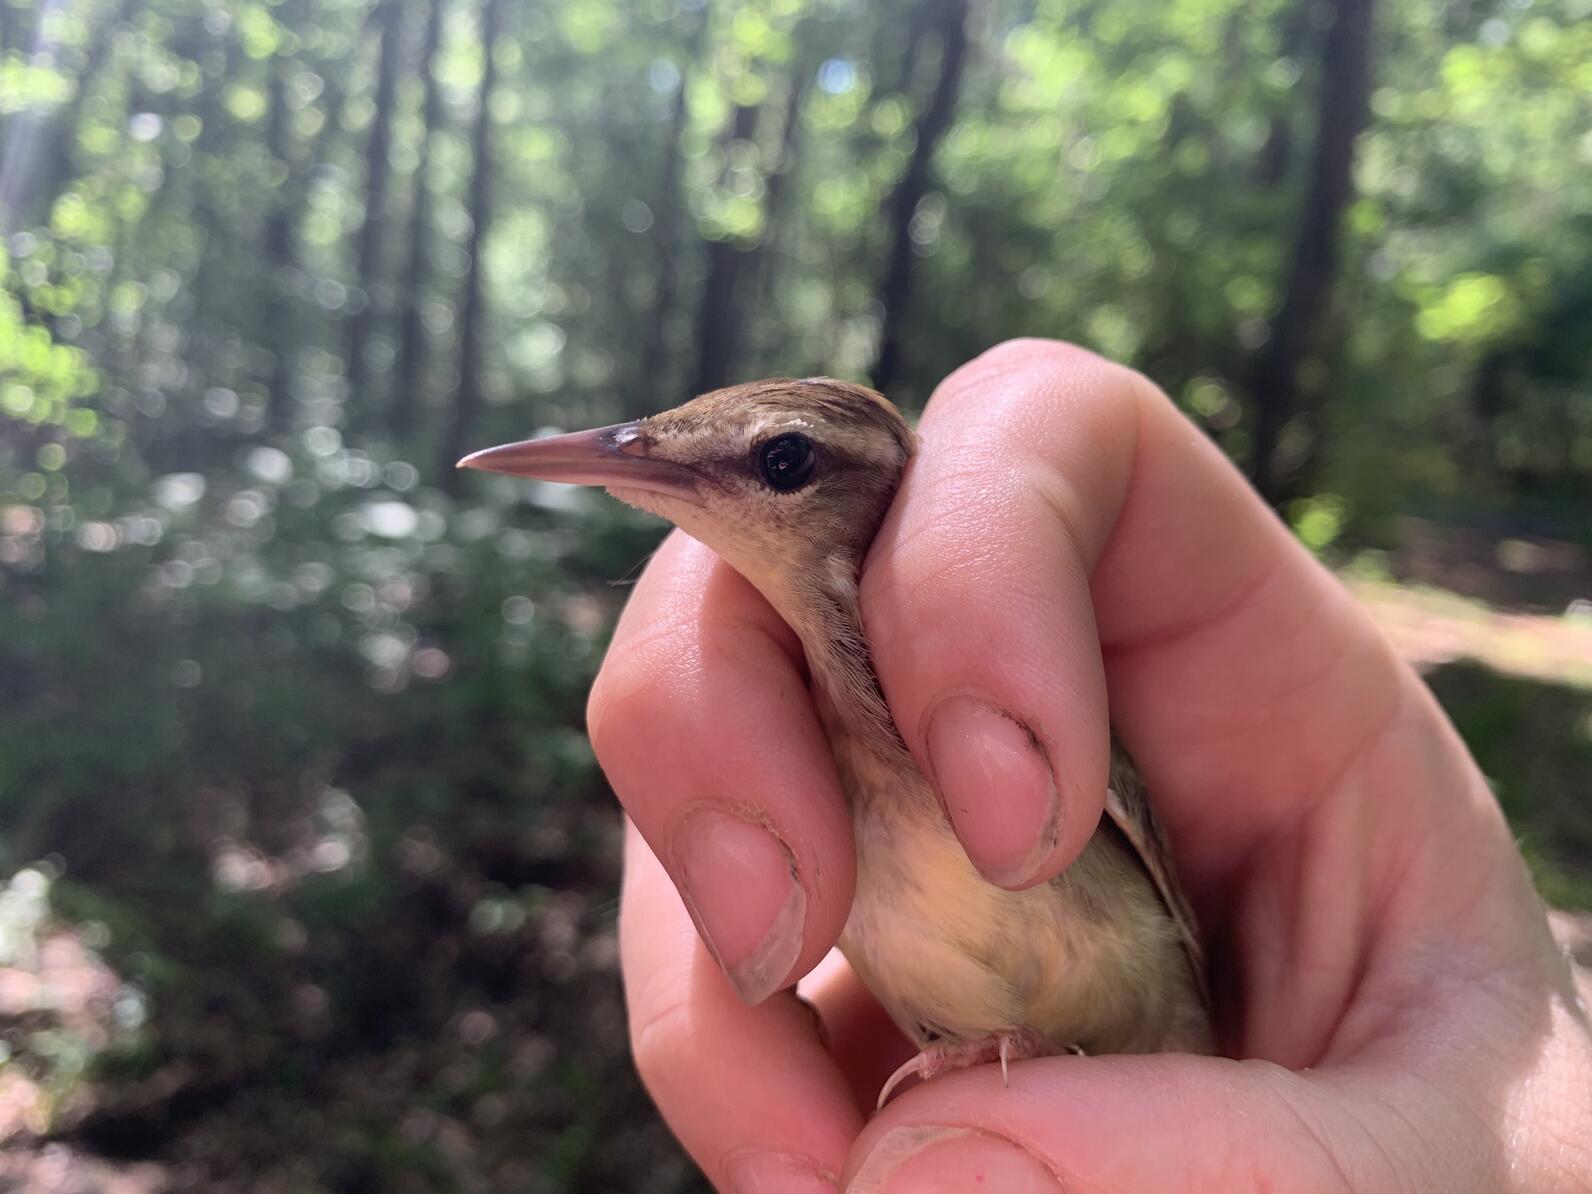 A Swainson's Warbler in hand